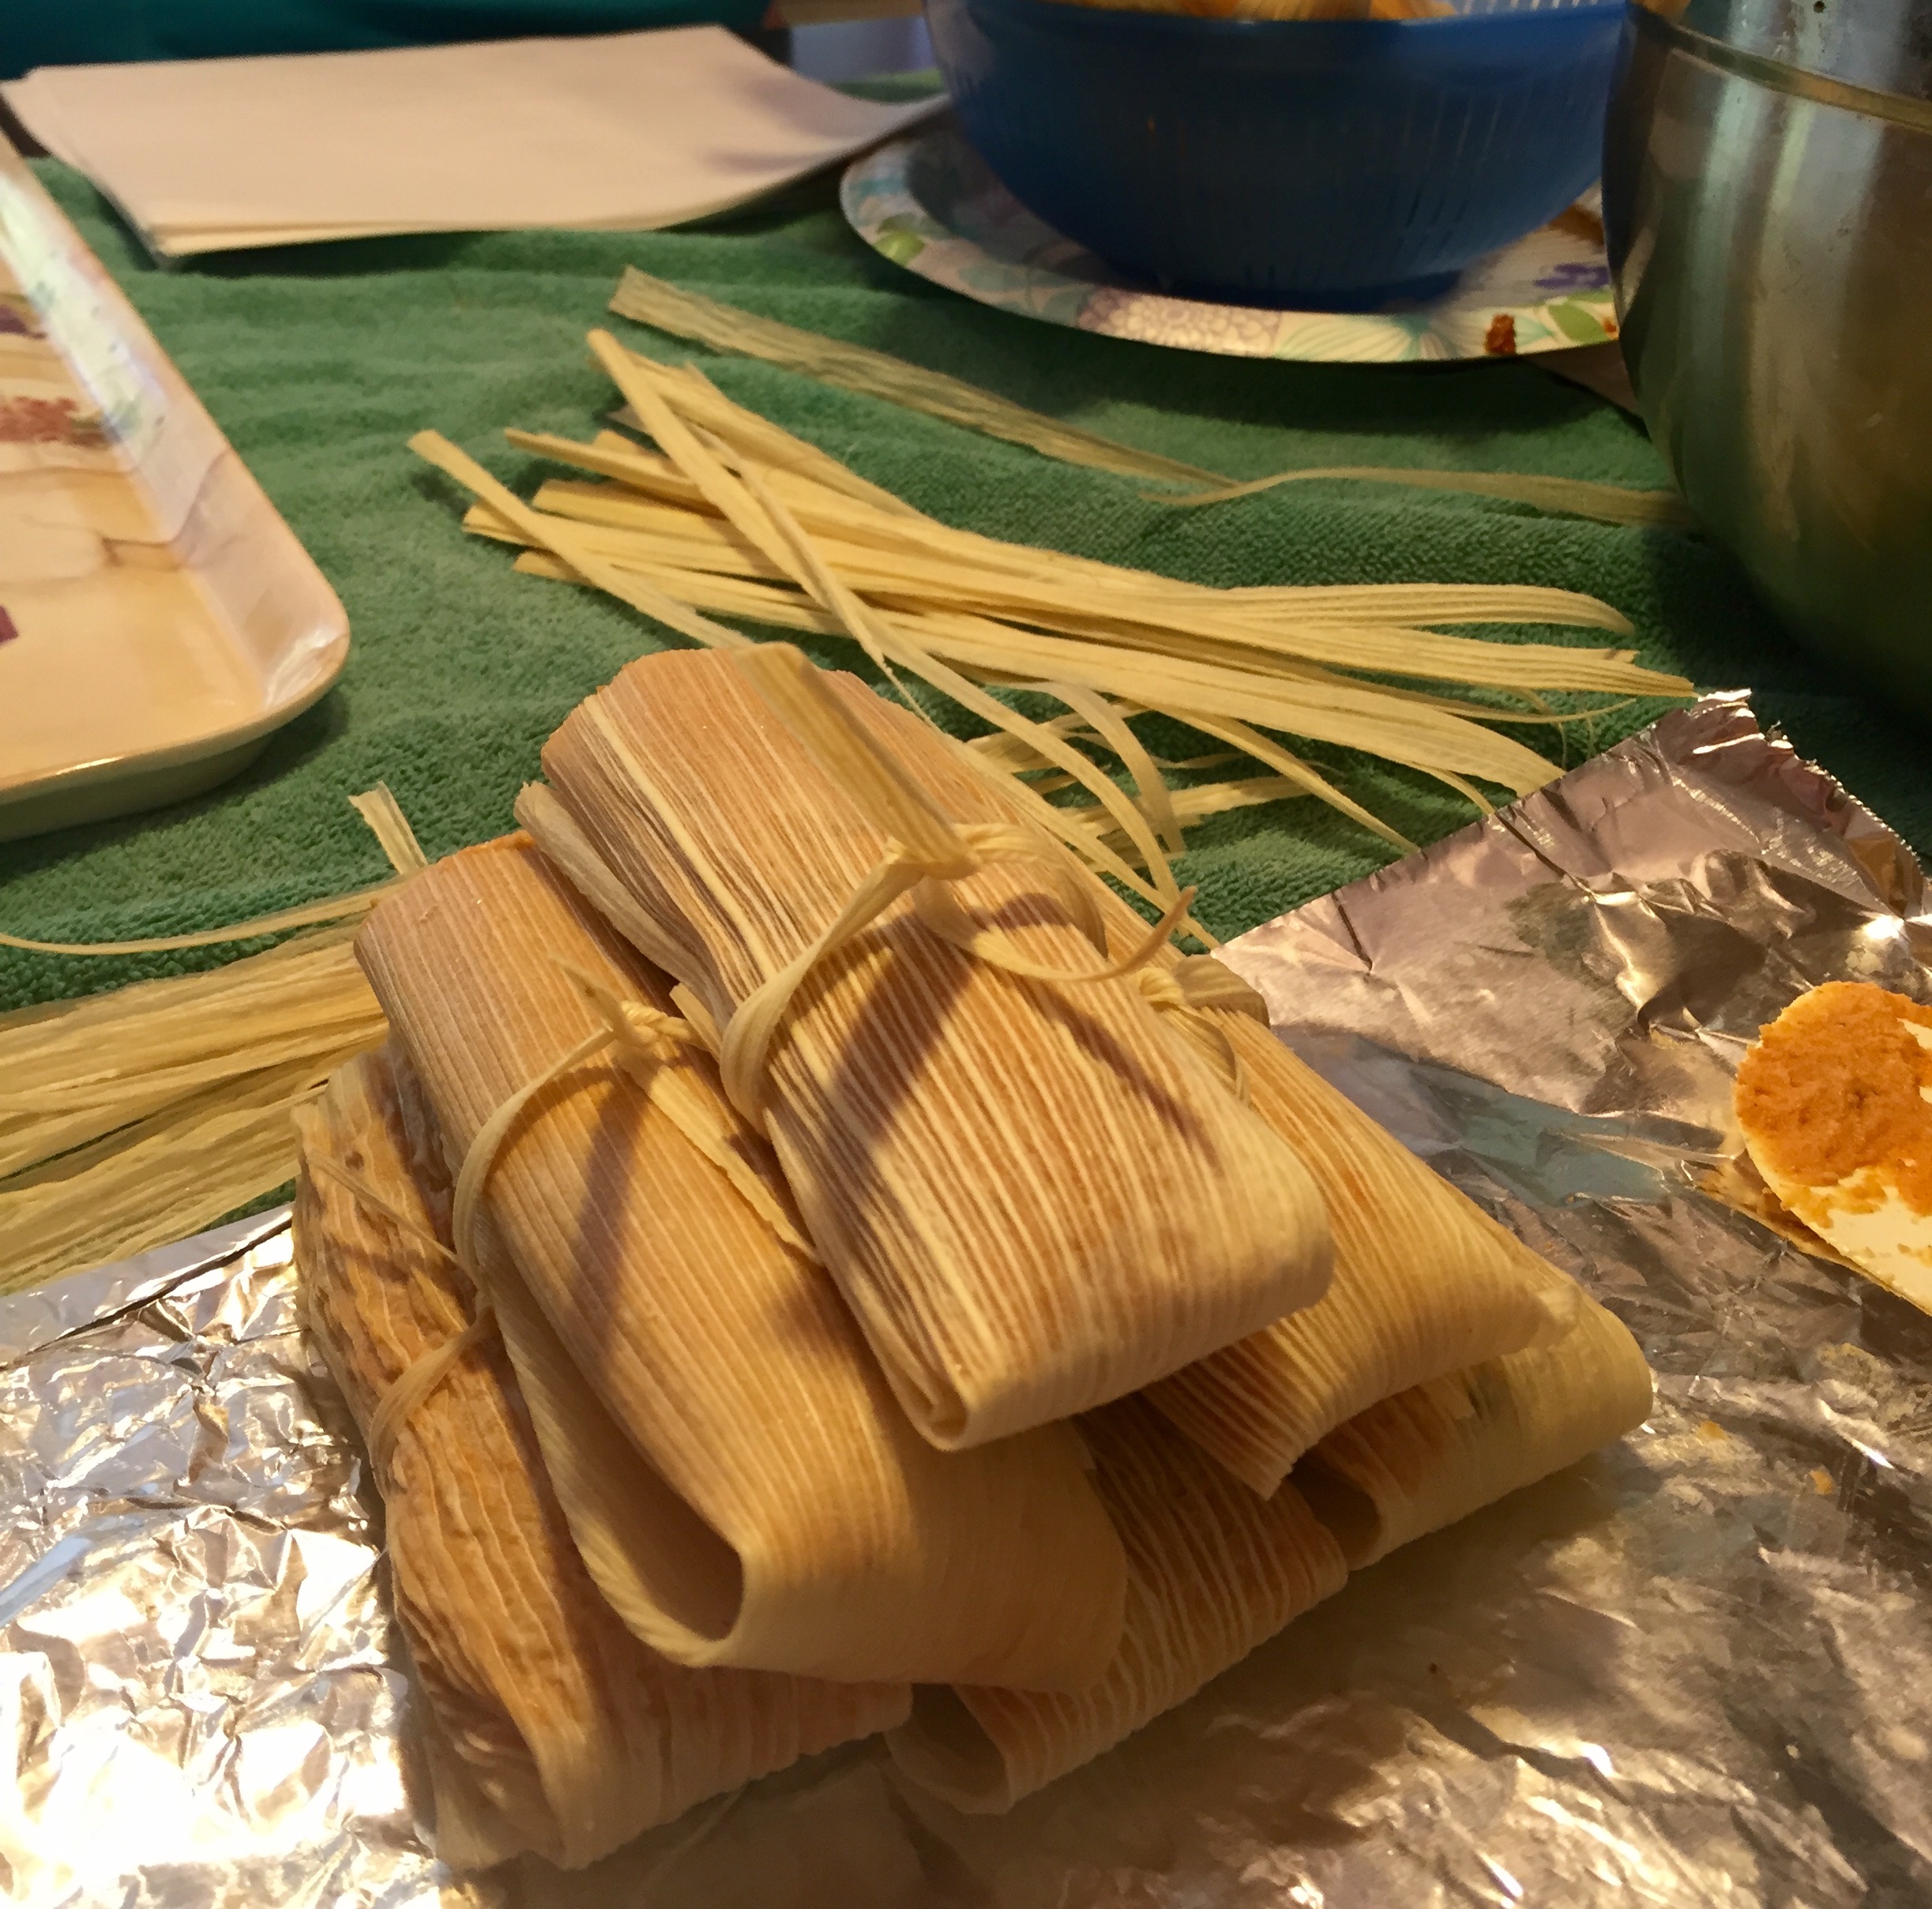 Tamales for everyone – make your own!